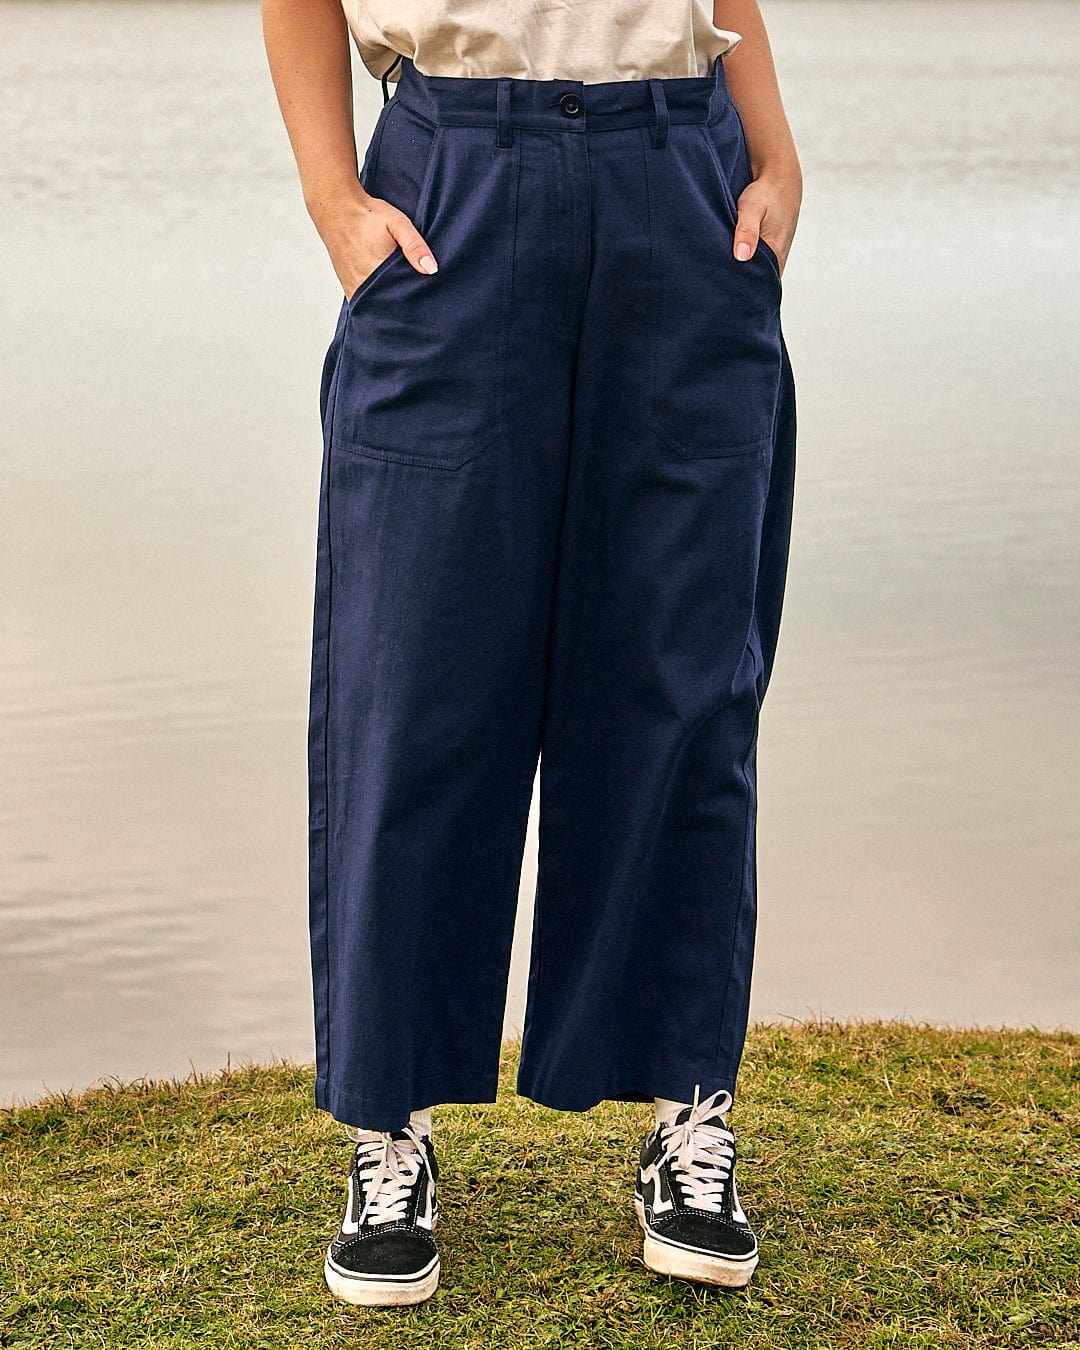 A woman is standing in front of a body of water wearing a pair of Saltrock's Hilda - Womens Canvas Trouser - Dark Blue.